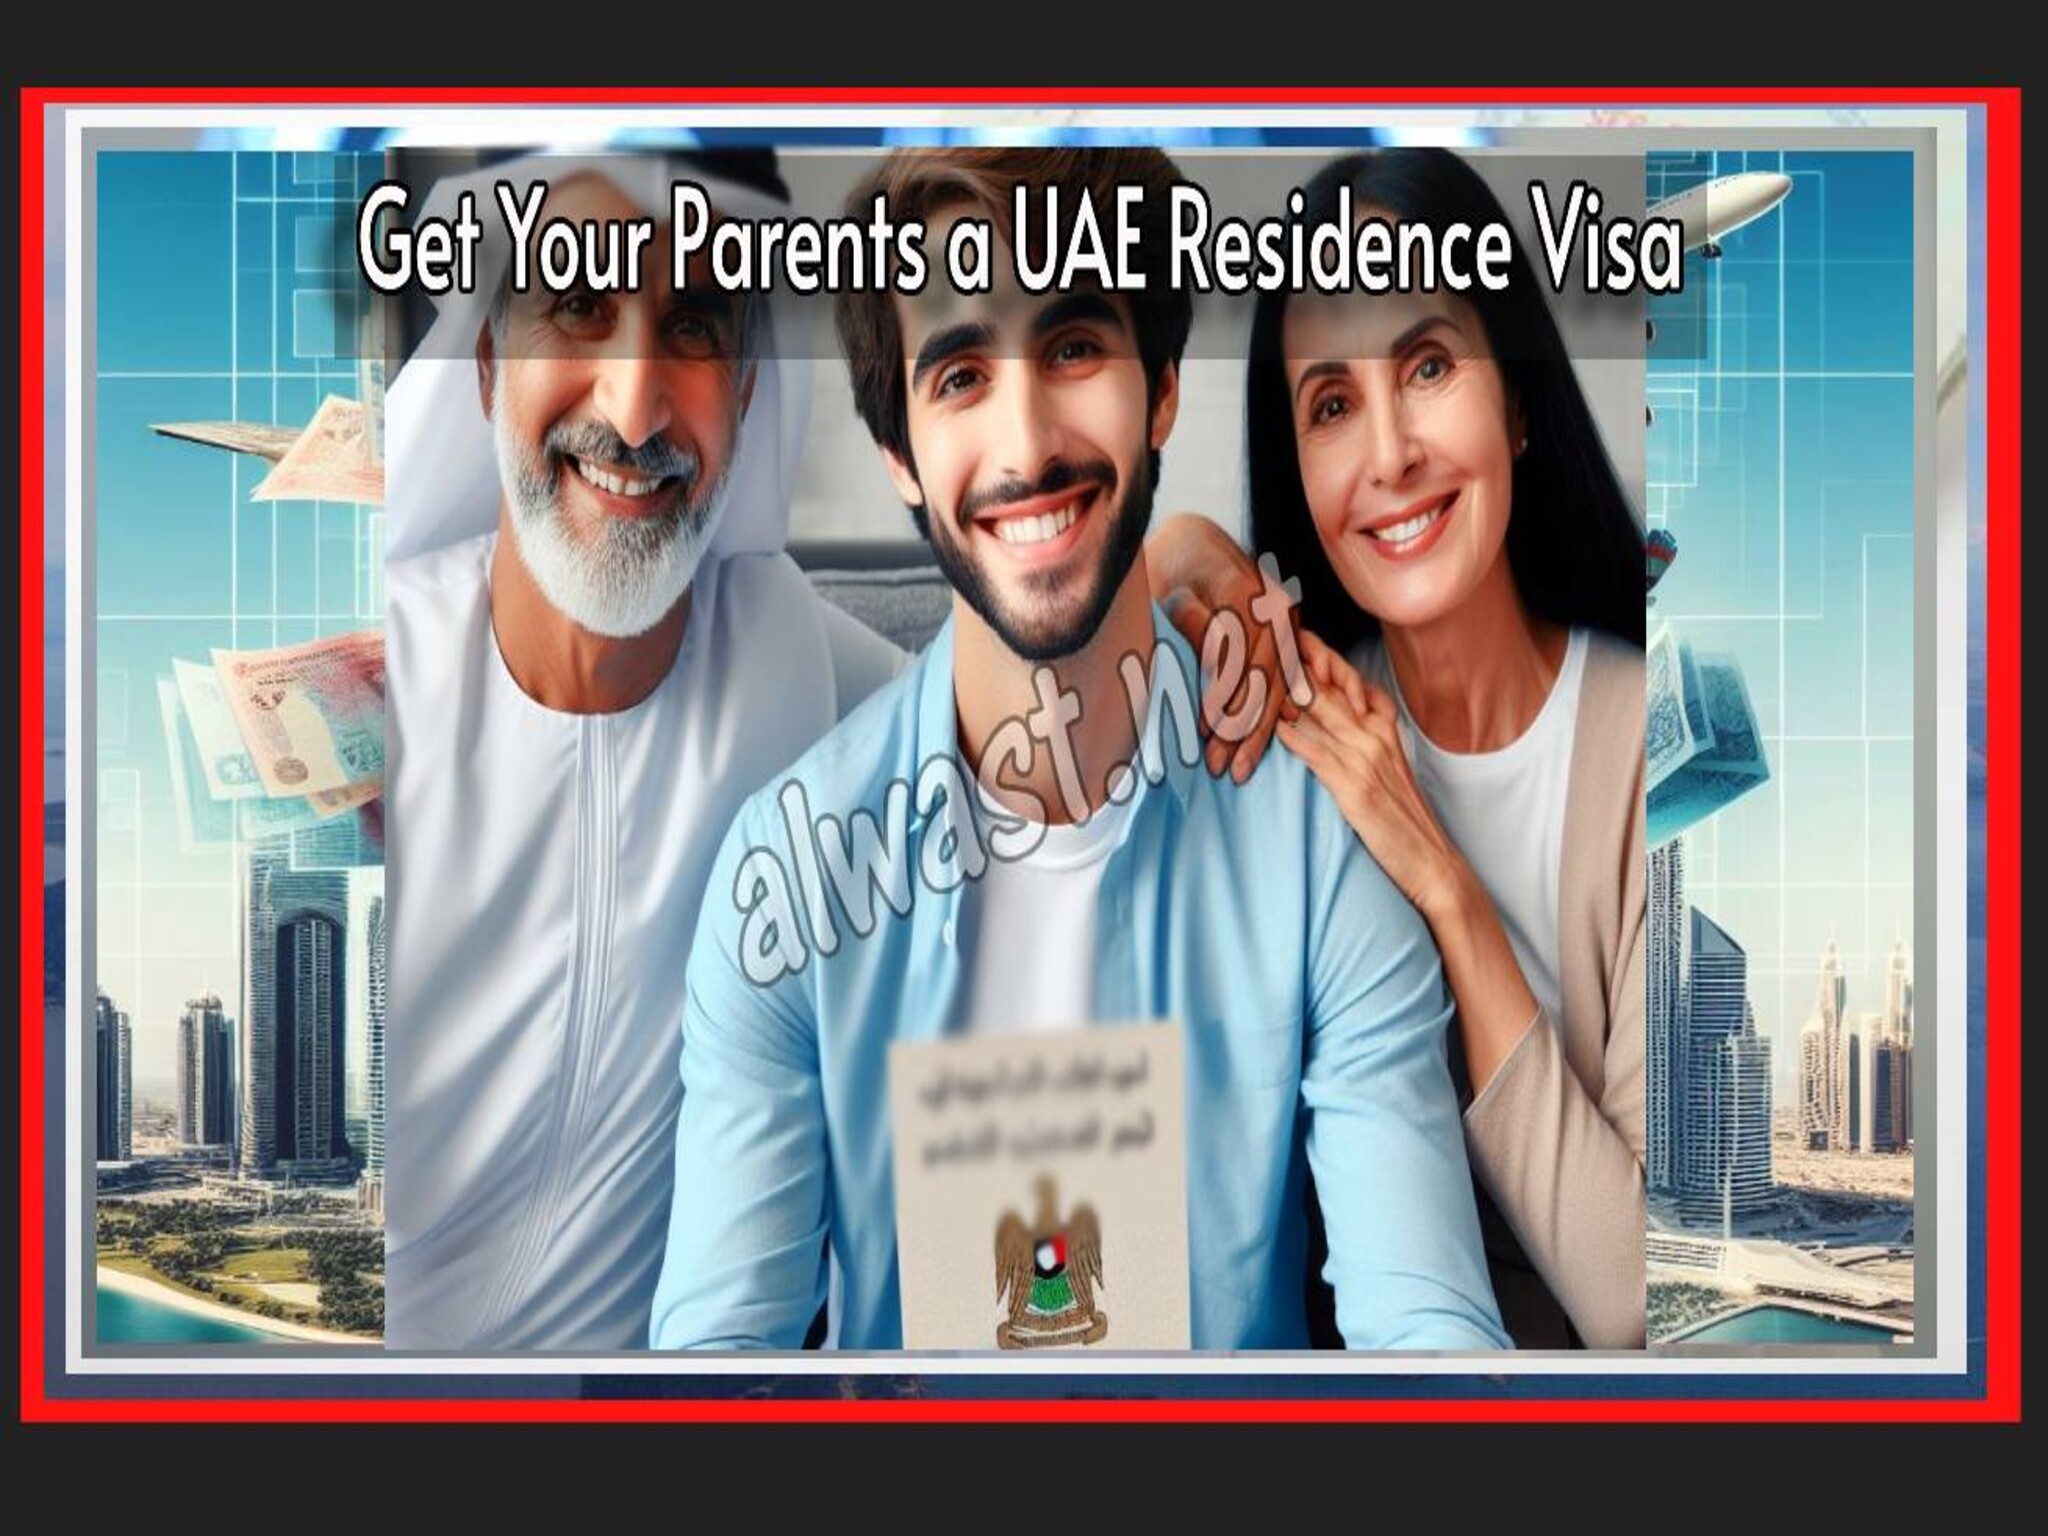 Get Your Parents a UAE Residence Visa: Easy Step-by-Step Guide